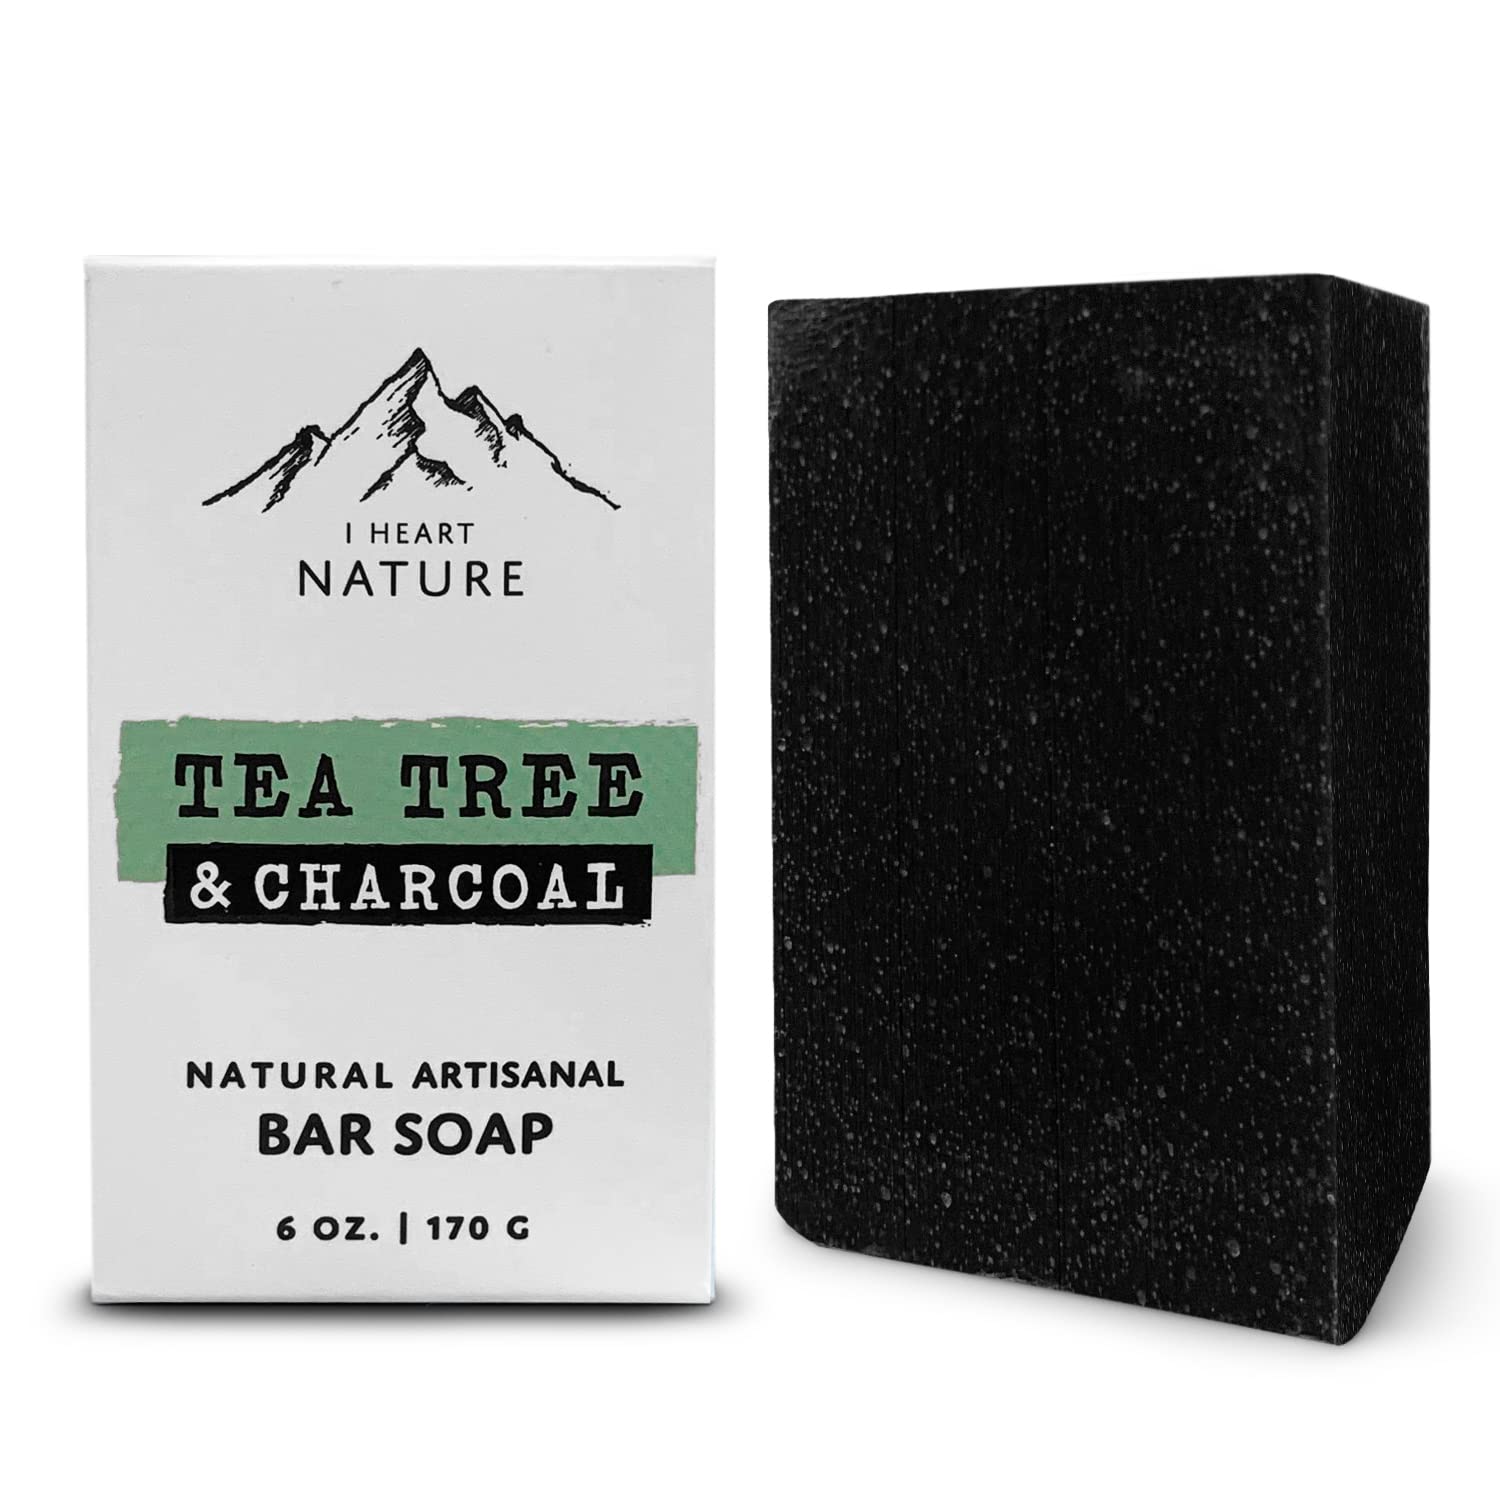 Tea Tree Charcoal Soap - Rich Creamy Lather, Nourishing and Gentle for All Skin Types